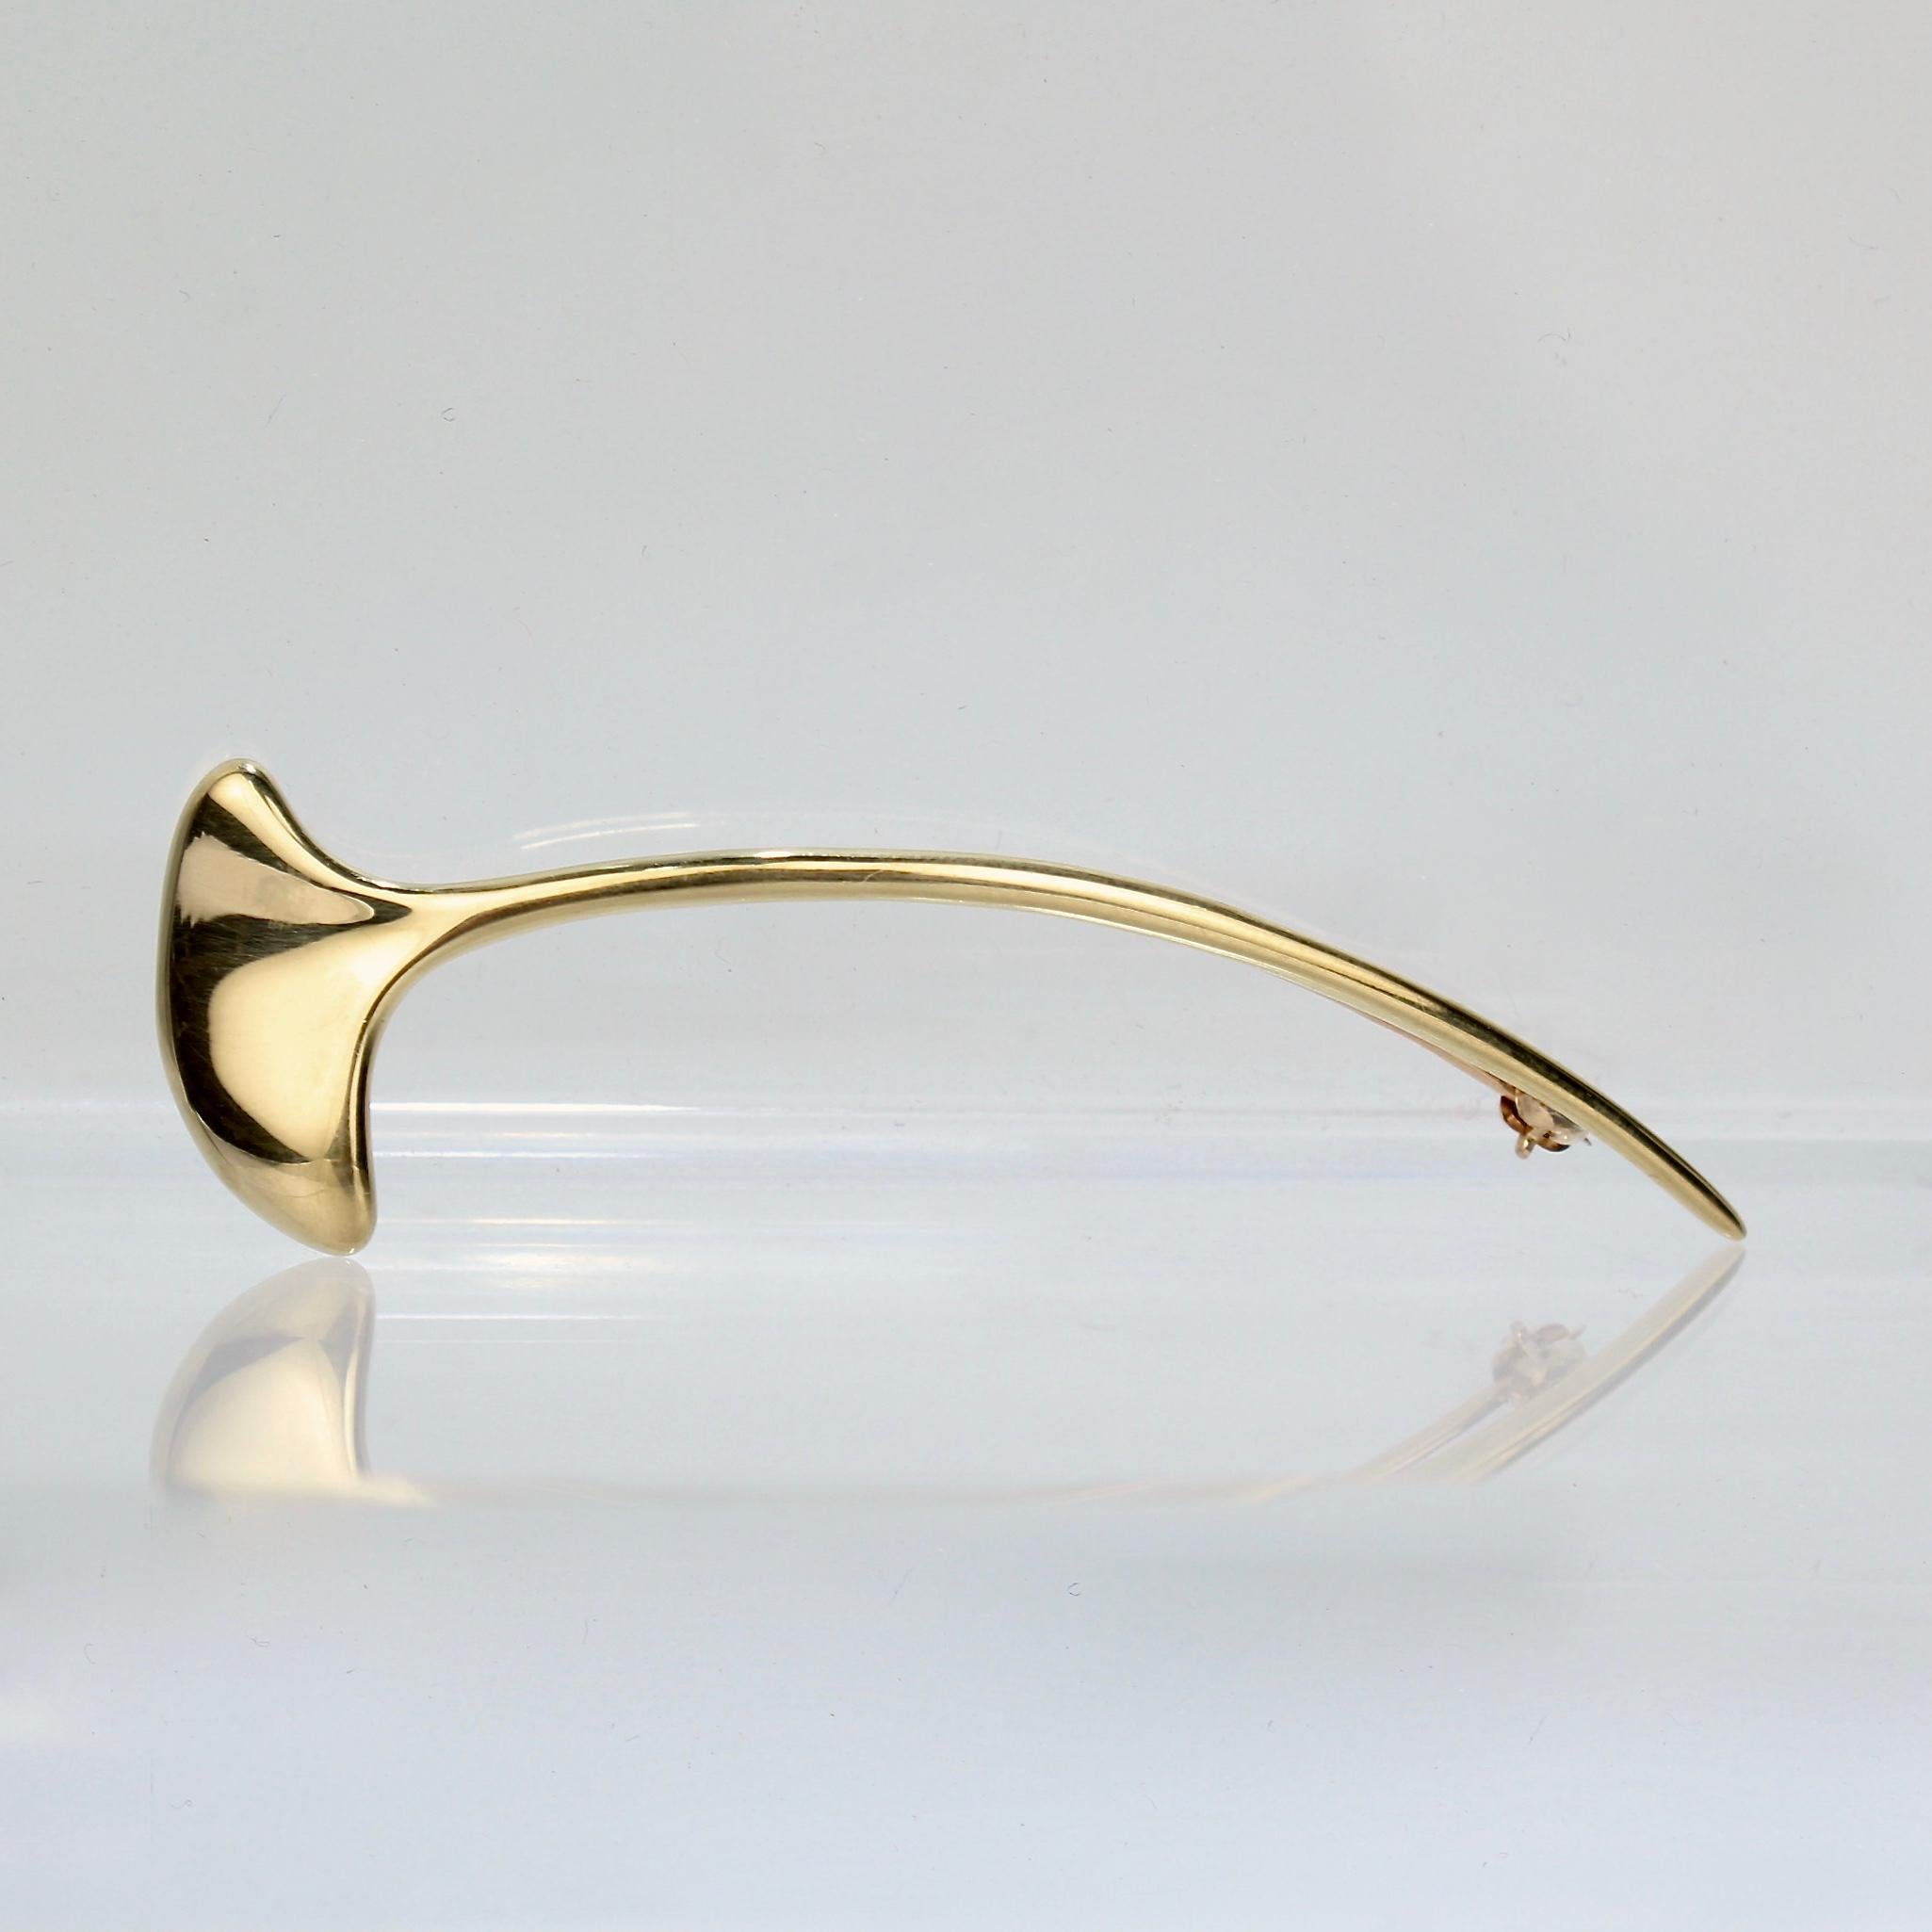 A wonderful Tiffany & Co. brooch.

In the form of a stylized gingko leaf and fashioned in 18K gold.

Marked to the reverse: Tiffany & Co. and 18K

Length: ca. 54 mm

A great, modern Tiffany brooch!

Items purchased from this dealer must delight you.